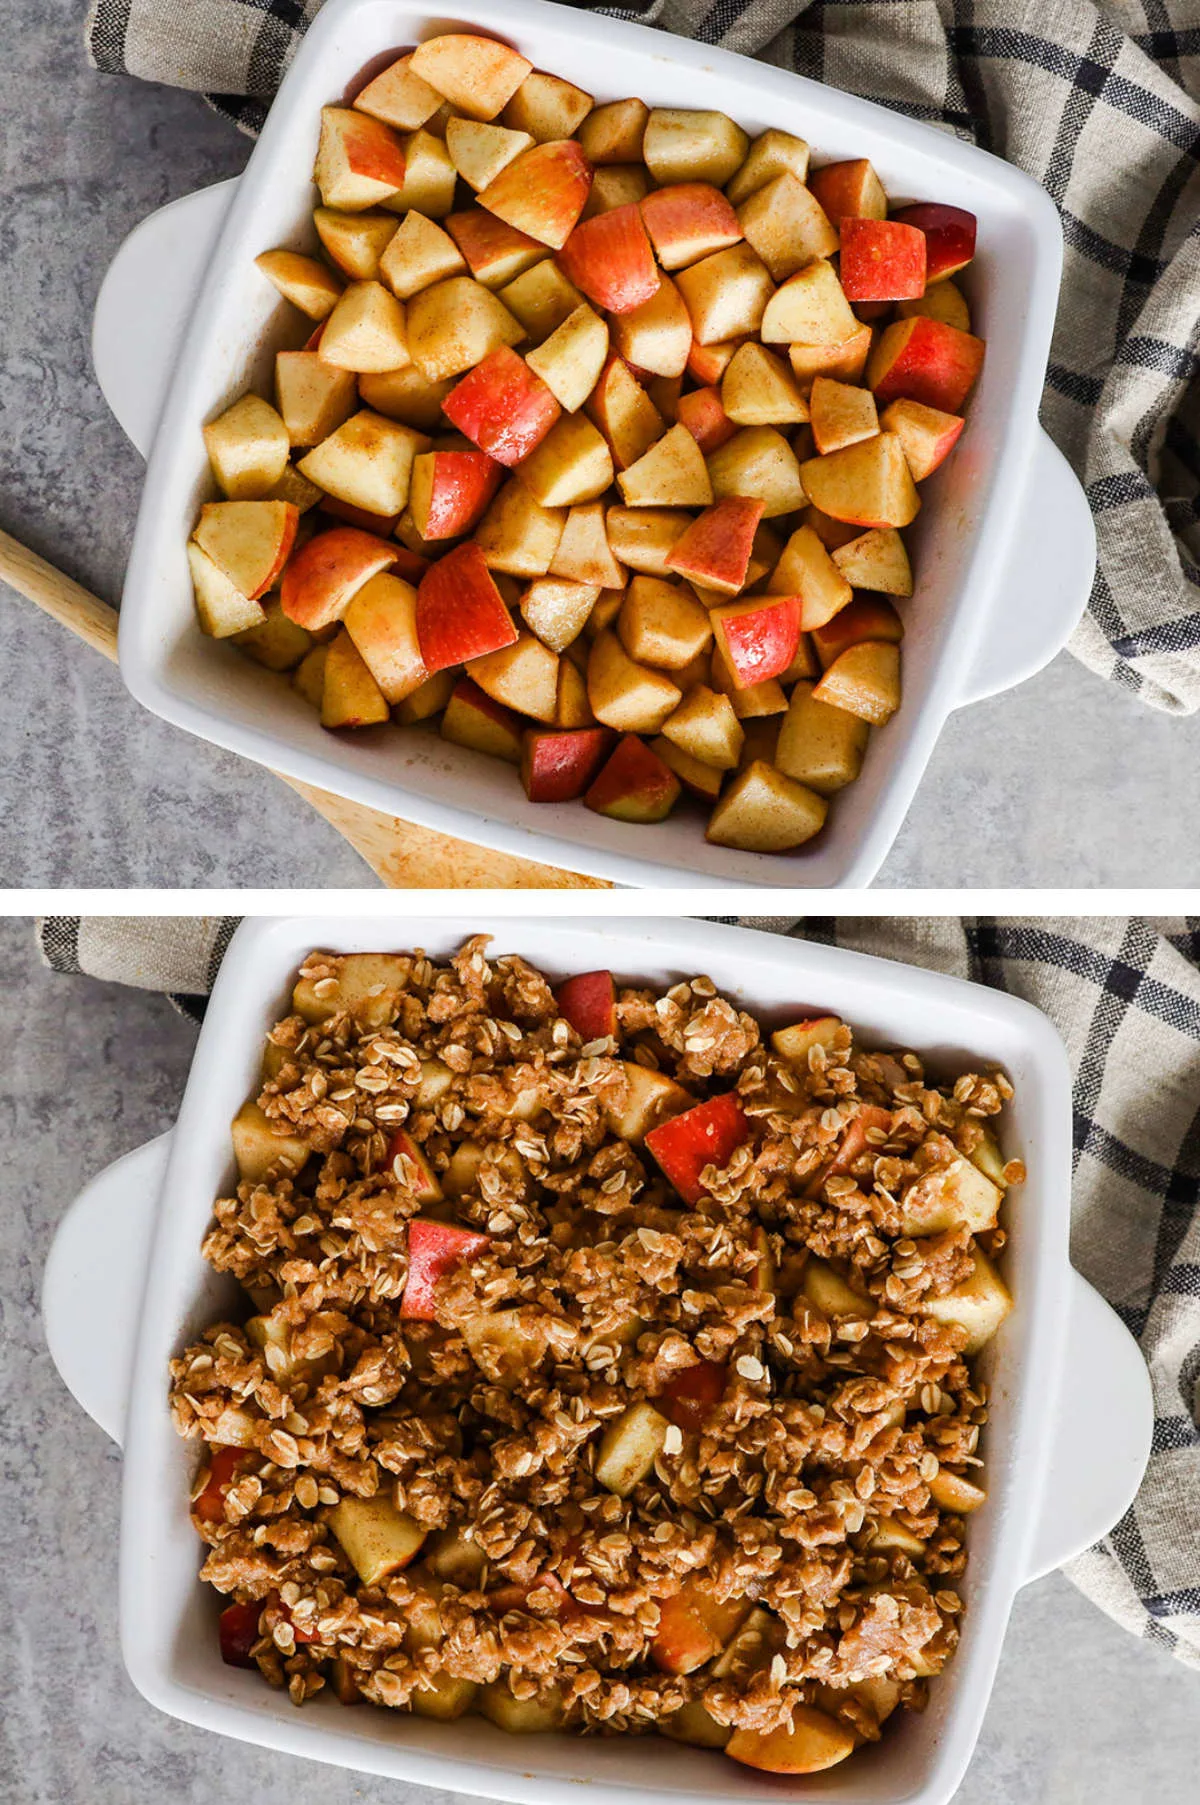 Two overhead images in one: 1. The seasoned apple chunks are placed in a shallow white baking dish. 2. The rolled oat mixture is evenly spread across the apples. 